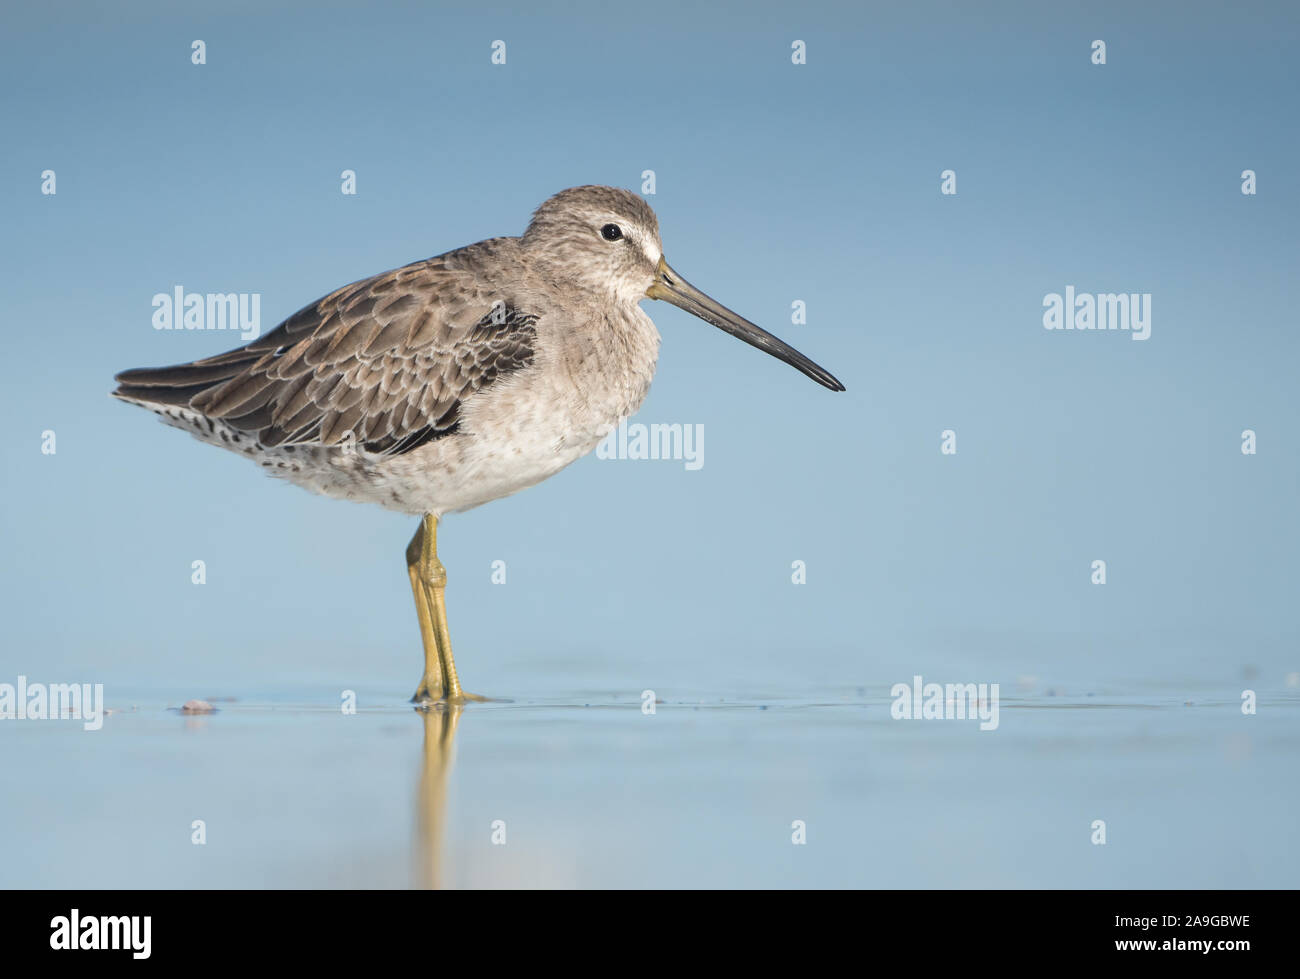 A Short-billed Dowitcher (Limnodromus griseus) on a sandy beach in Florida, USA. Stock Photo